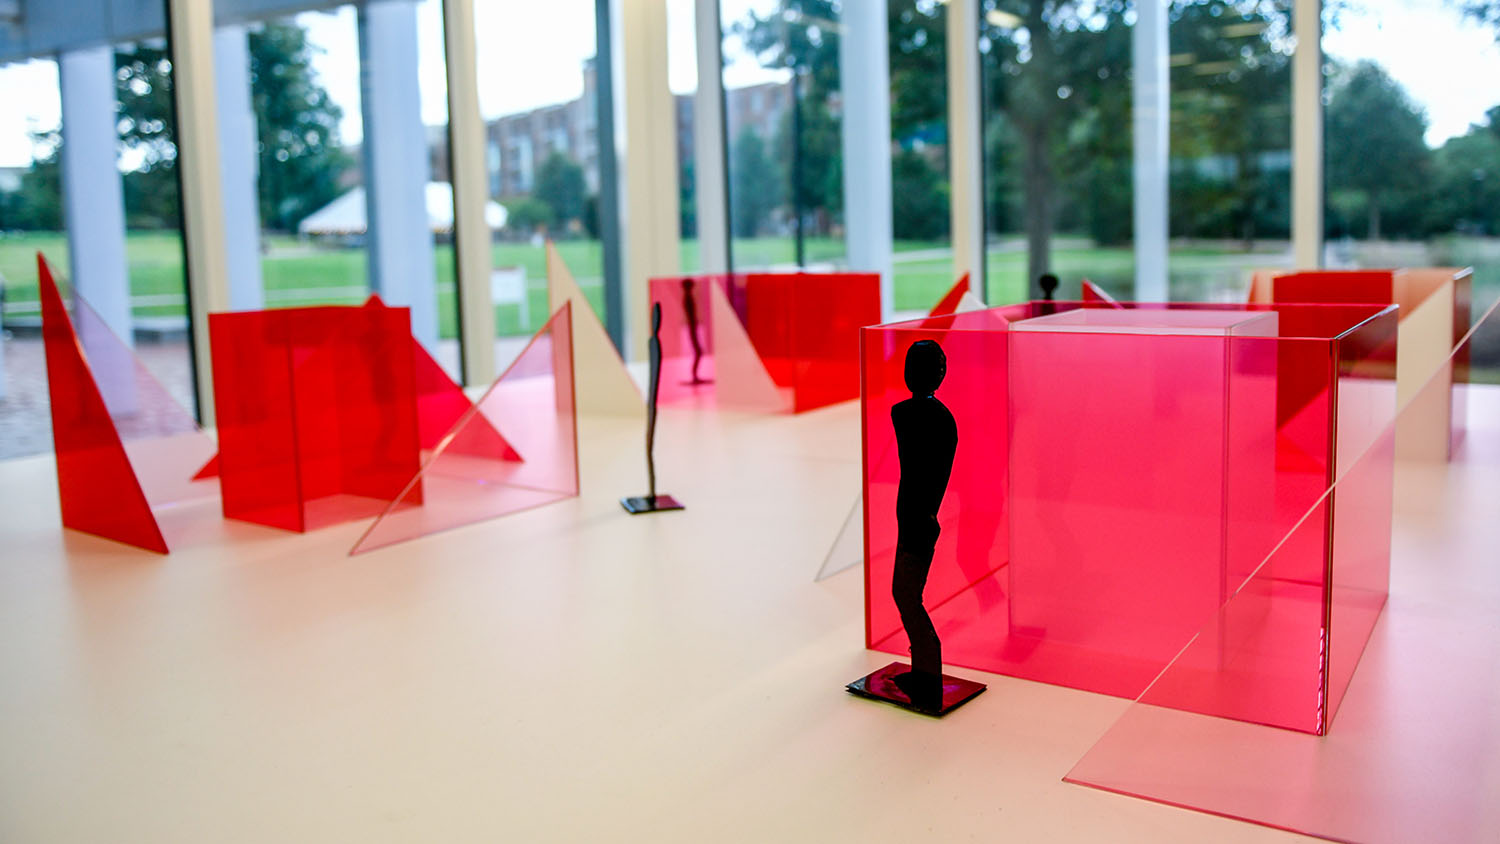 Photo features a maquette of artist Larry Bell's "Reds and Whites" installation slated for Centennial Campus, featuring red and white sculptural blocks, in the lobby of Hunt Library.